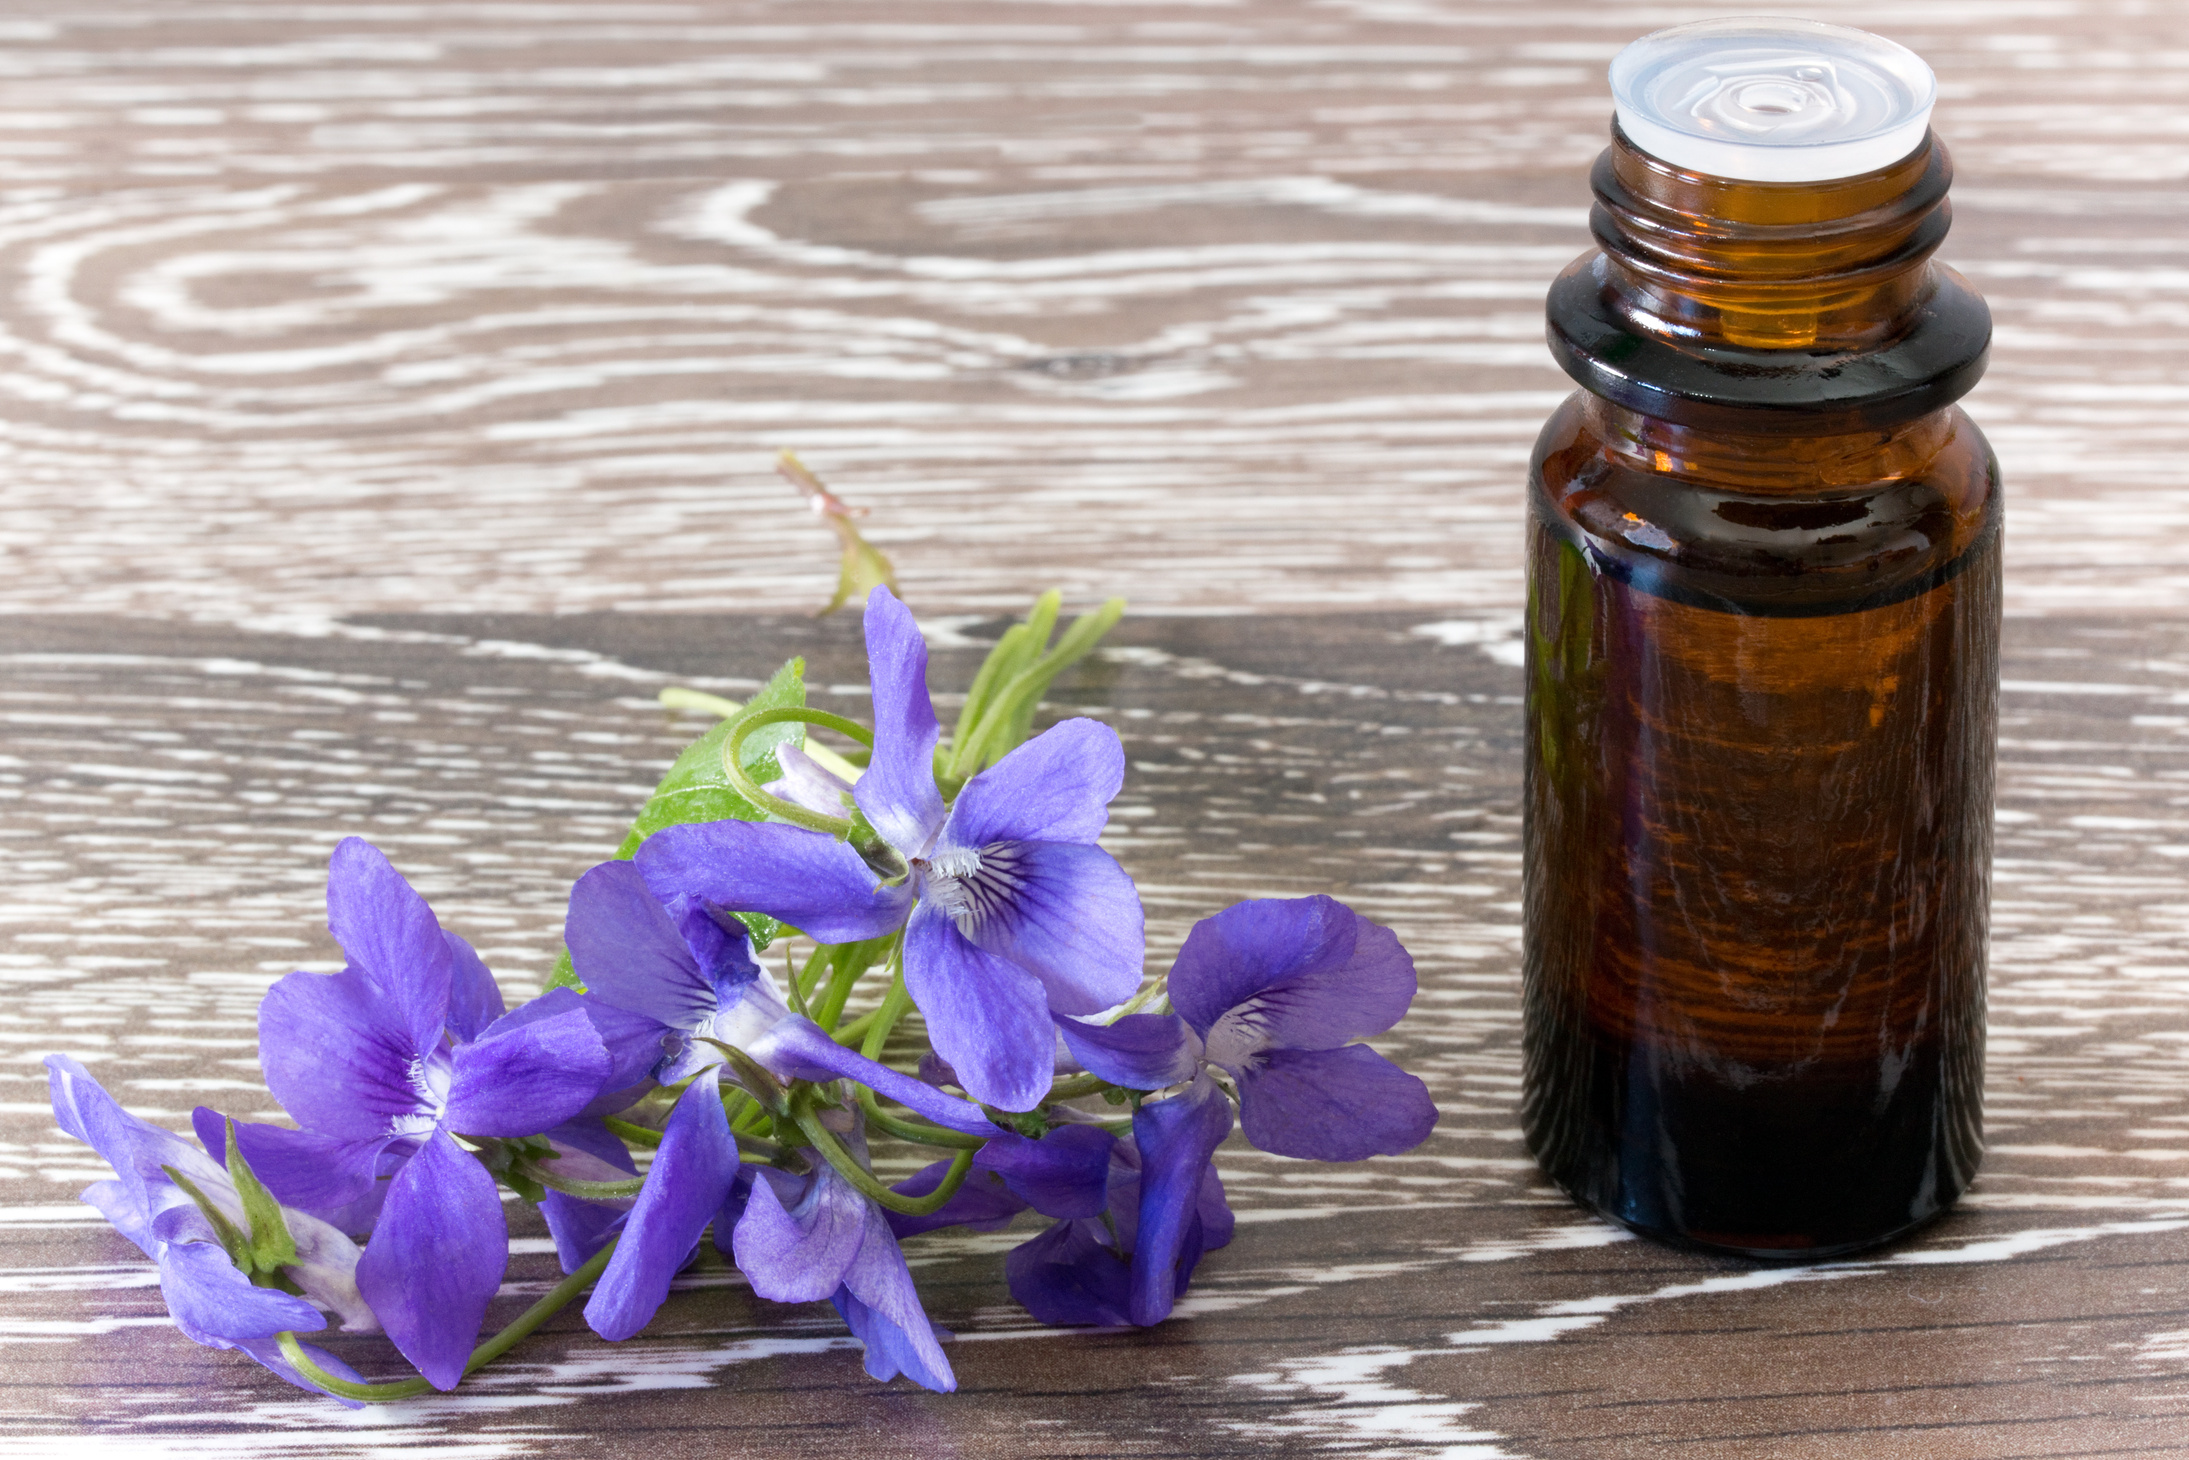 Bach flower remedies of violets